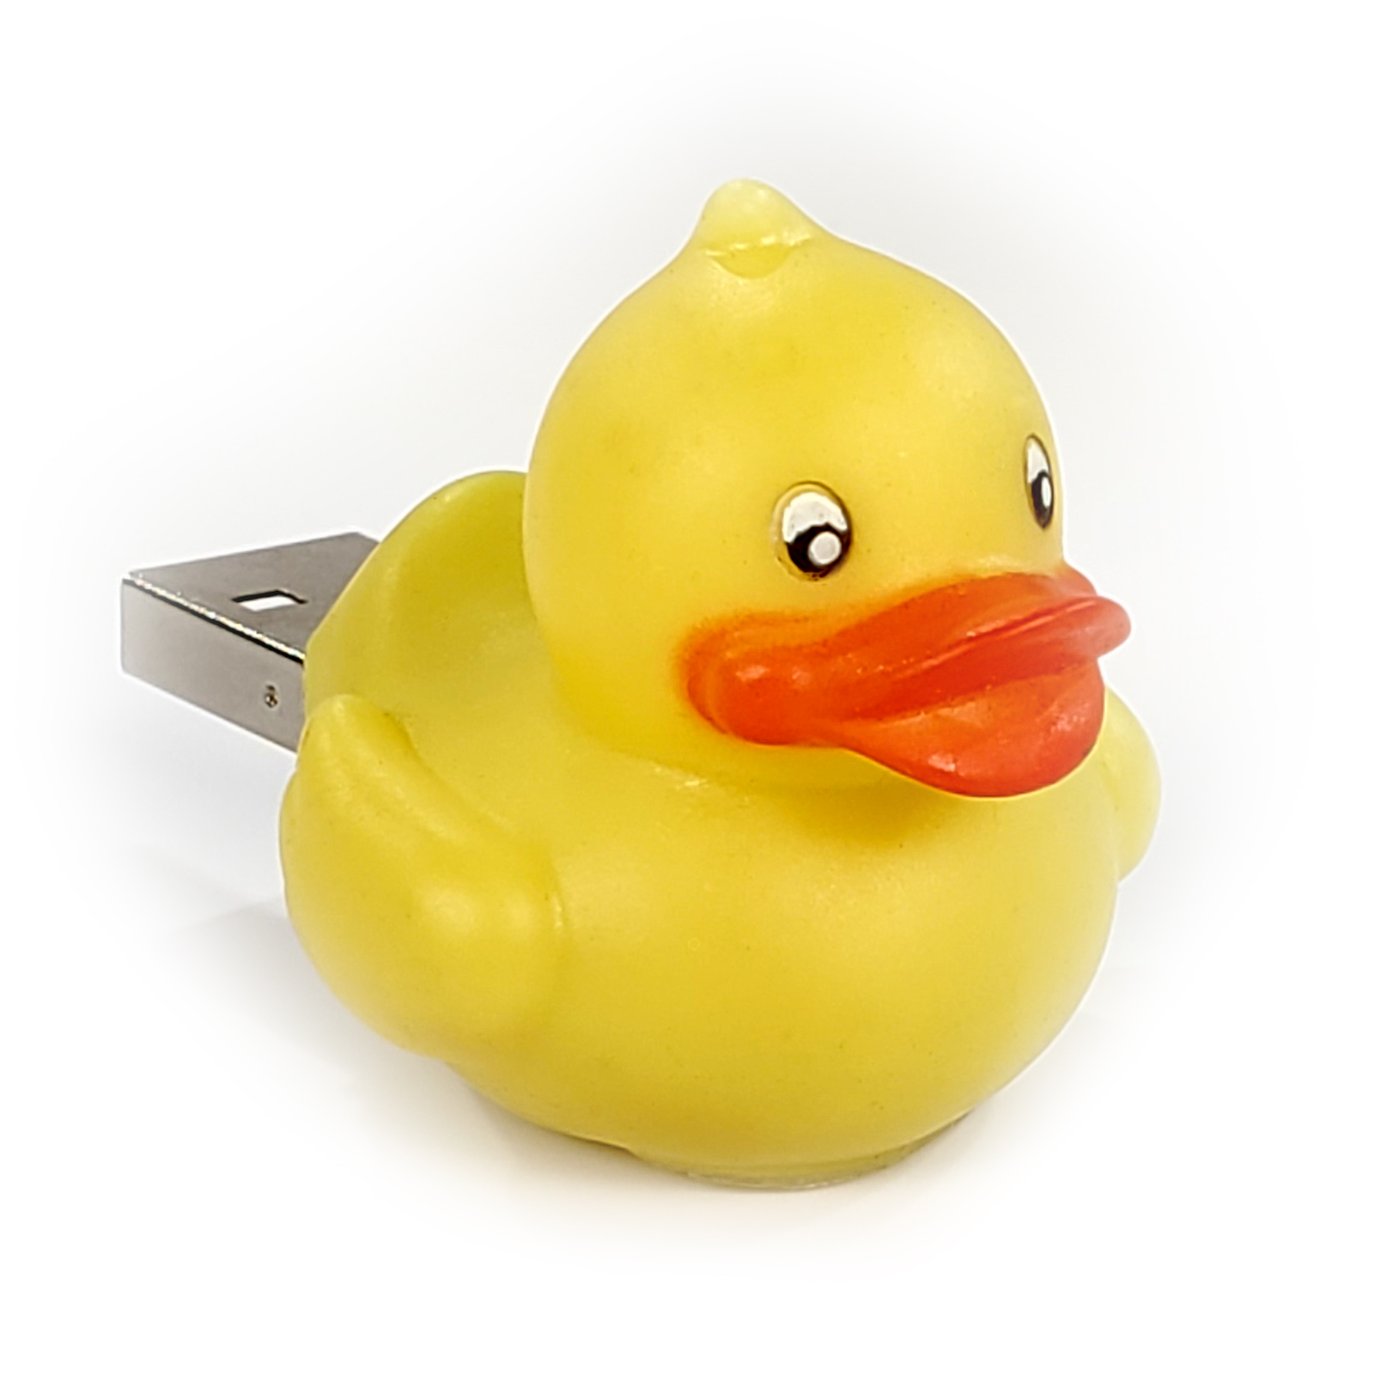 What is a Rubber Ducky Attack and Why you Need to Know About It